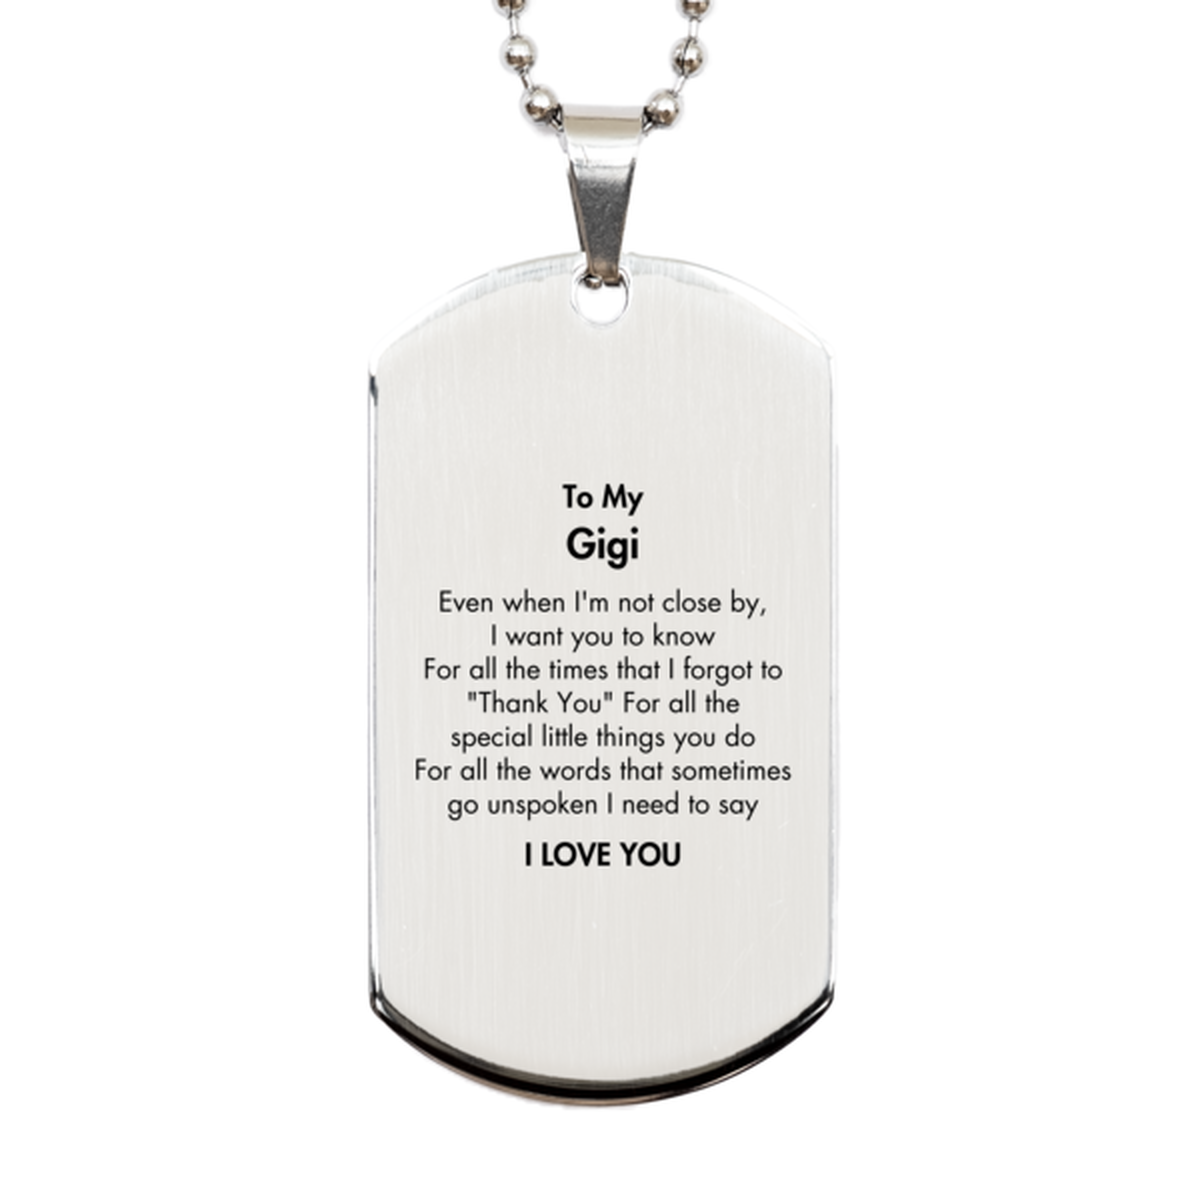 Thank You Gifts for Gigi, Keepsake Silver Dog Tag Gifts for Gigi Birthday Mother's day Father's Day Gigi For all the words That sometimes go unspoken I need to say I LOVE YOU